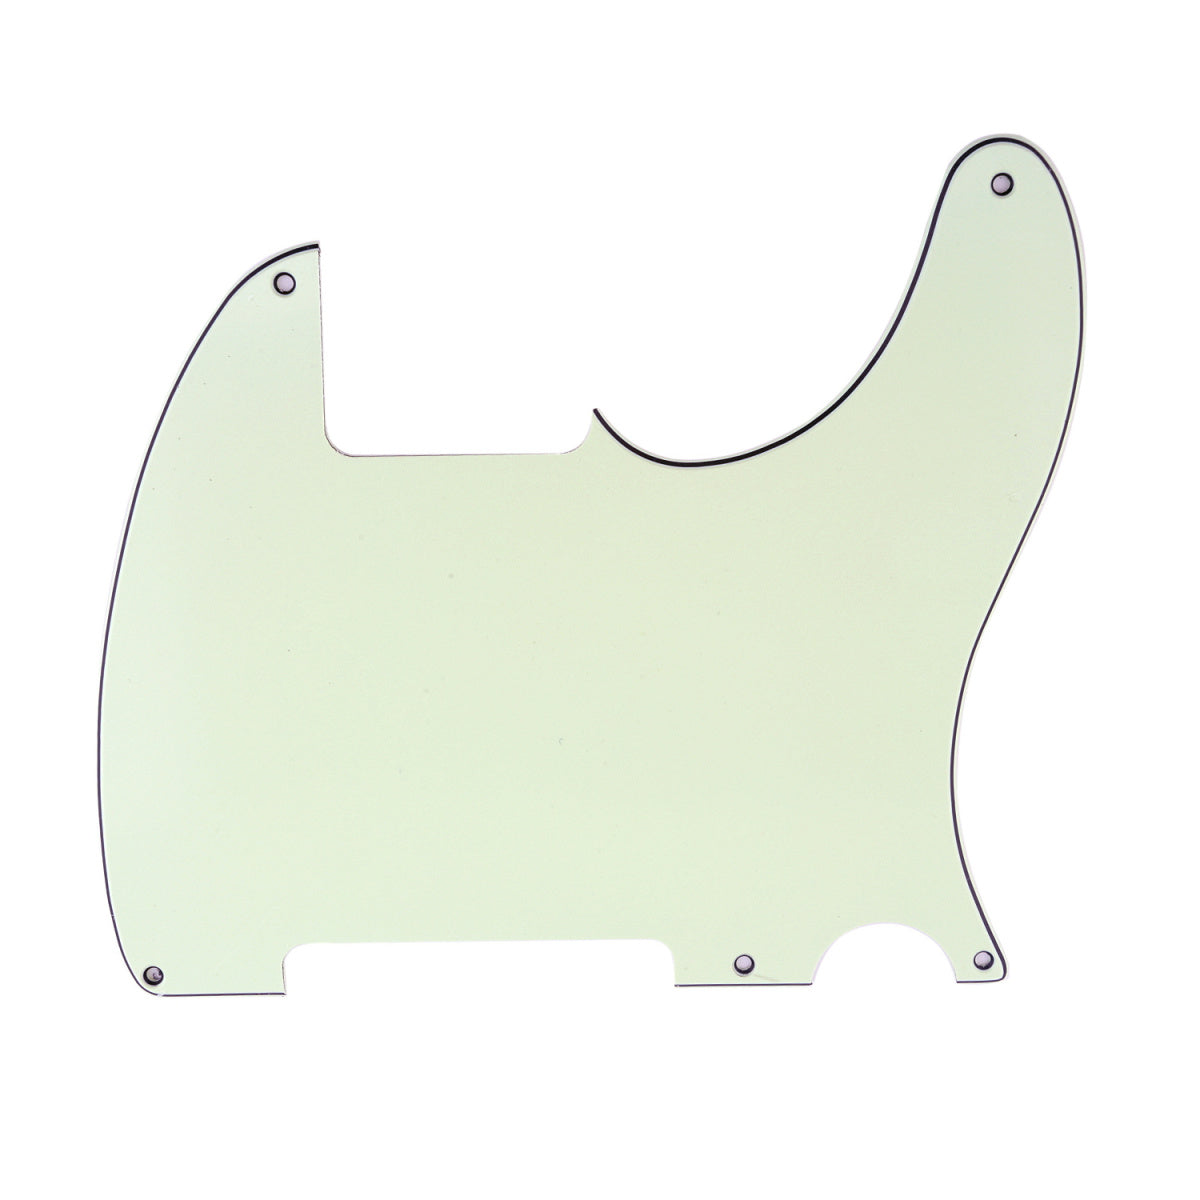 Musiclily 5 Hole Tele Pickguard Blank for Fender USA/Mexican Telecaster Esquire Guitar, 3Ply Ivory